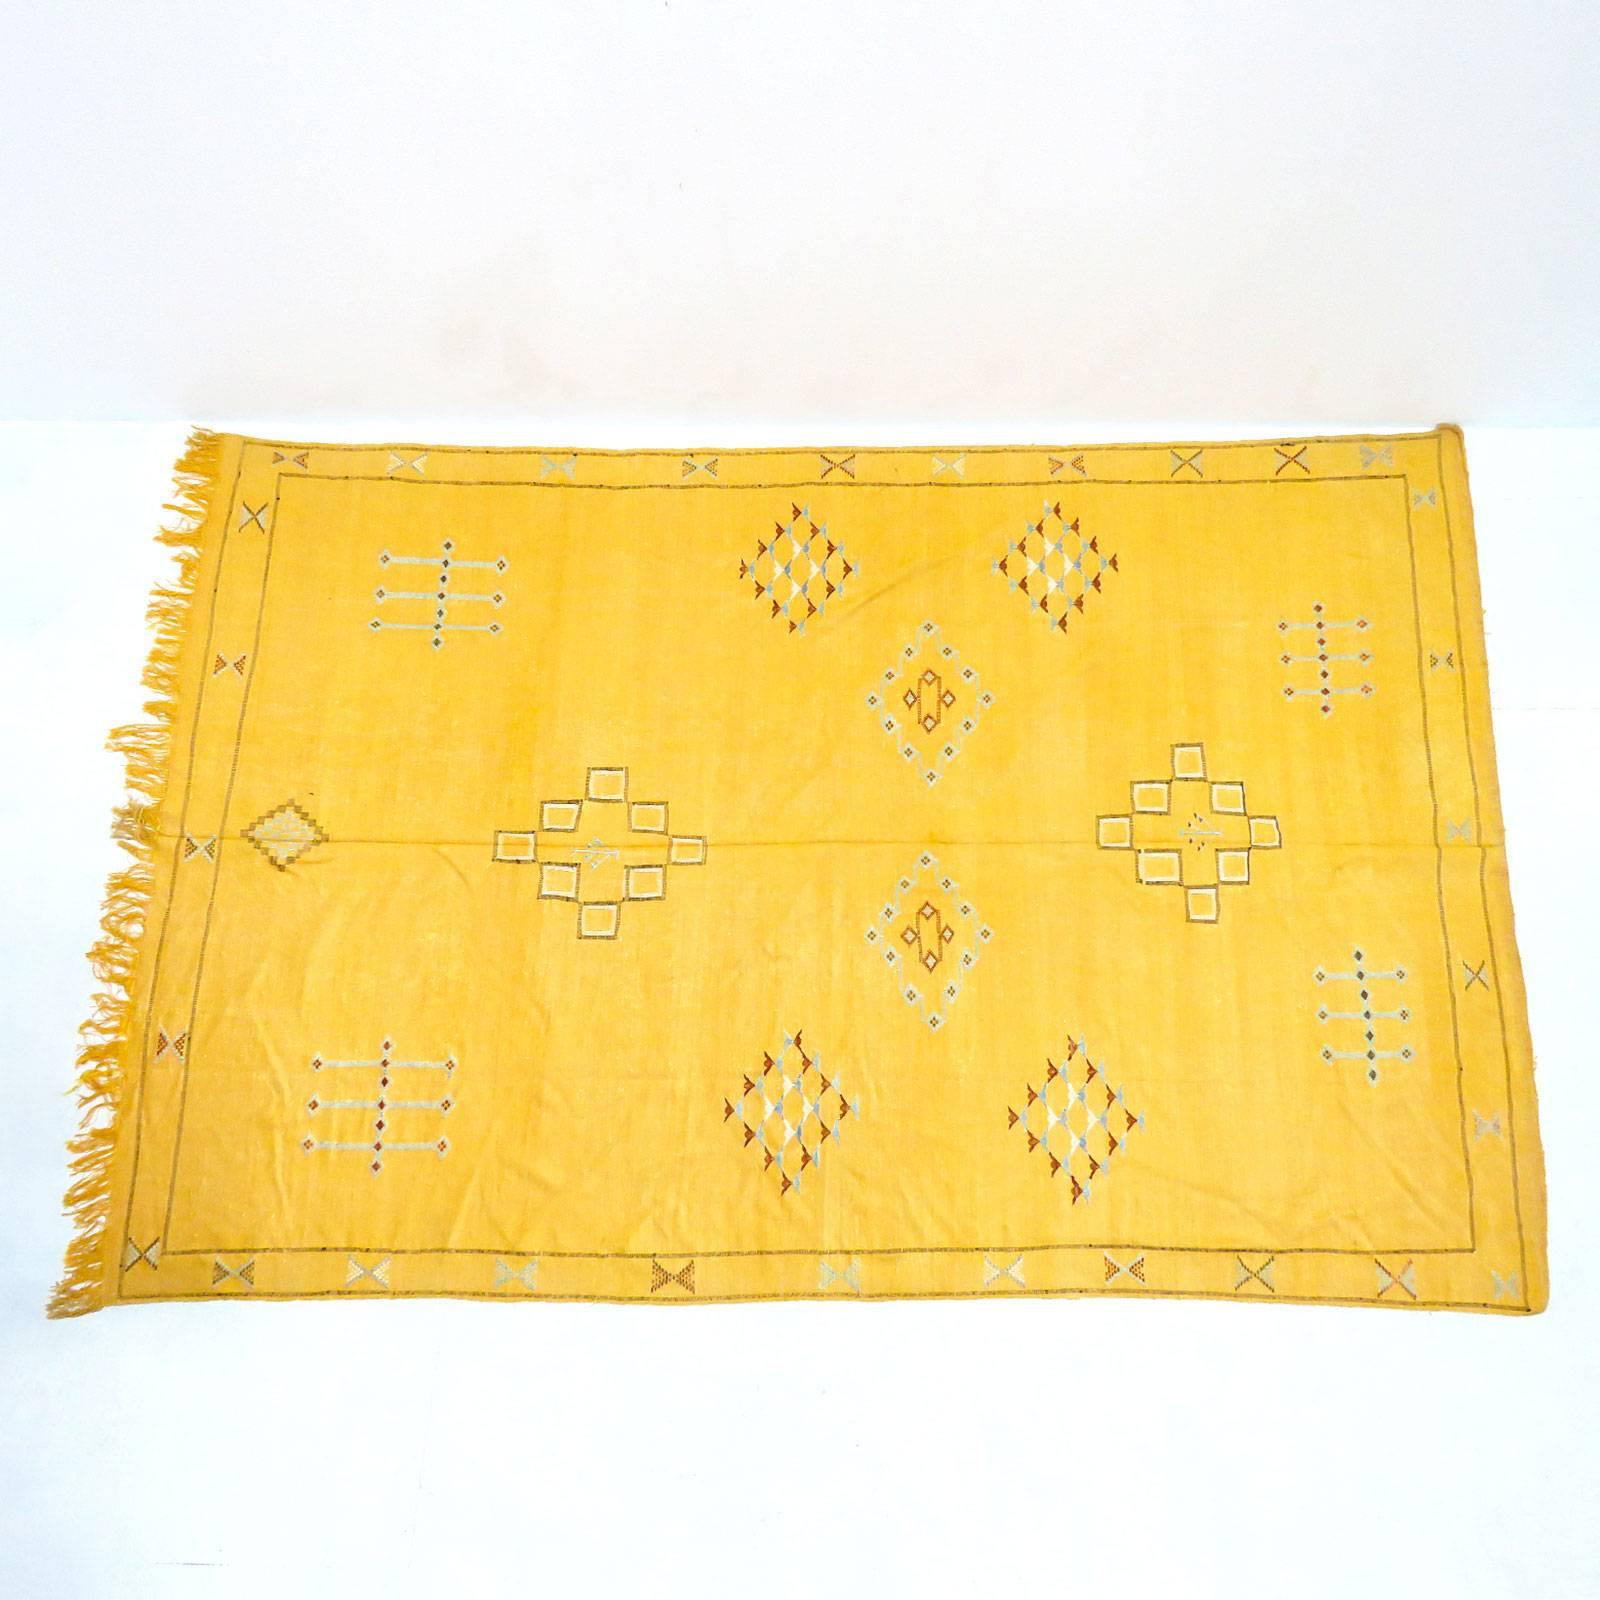 Vintage yellow or orange Moroccan Kilim with poly-chrome stylized patterns, fringes on one end.